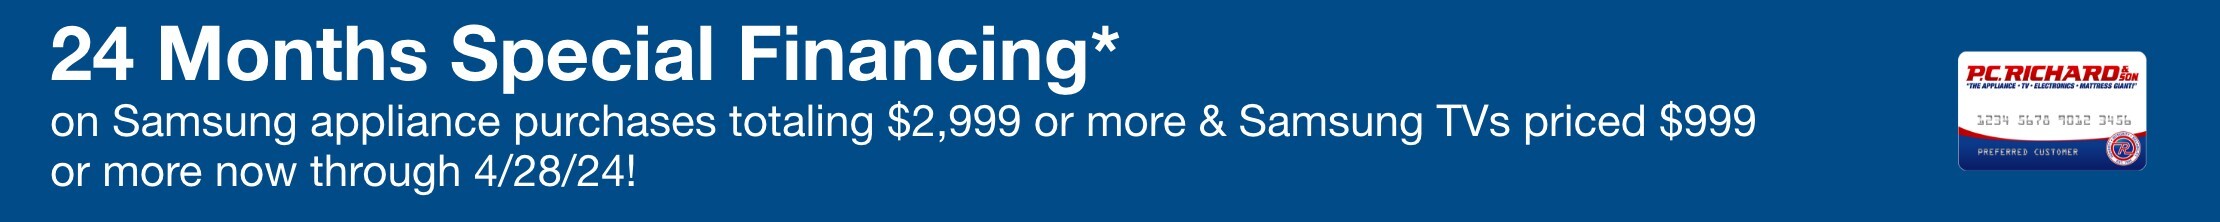 24 Months Special Financing* on samsung appliance purchases totaling $2,999 or more & samsung tv priced $999 or more now through 4/28/24